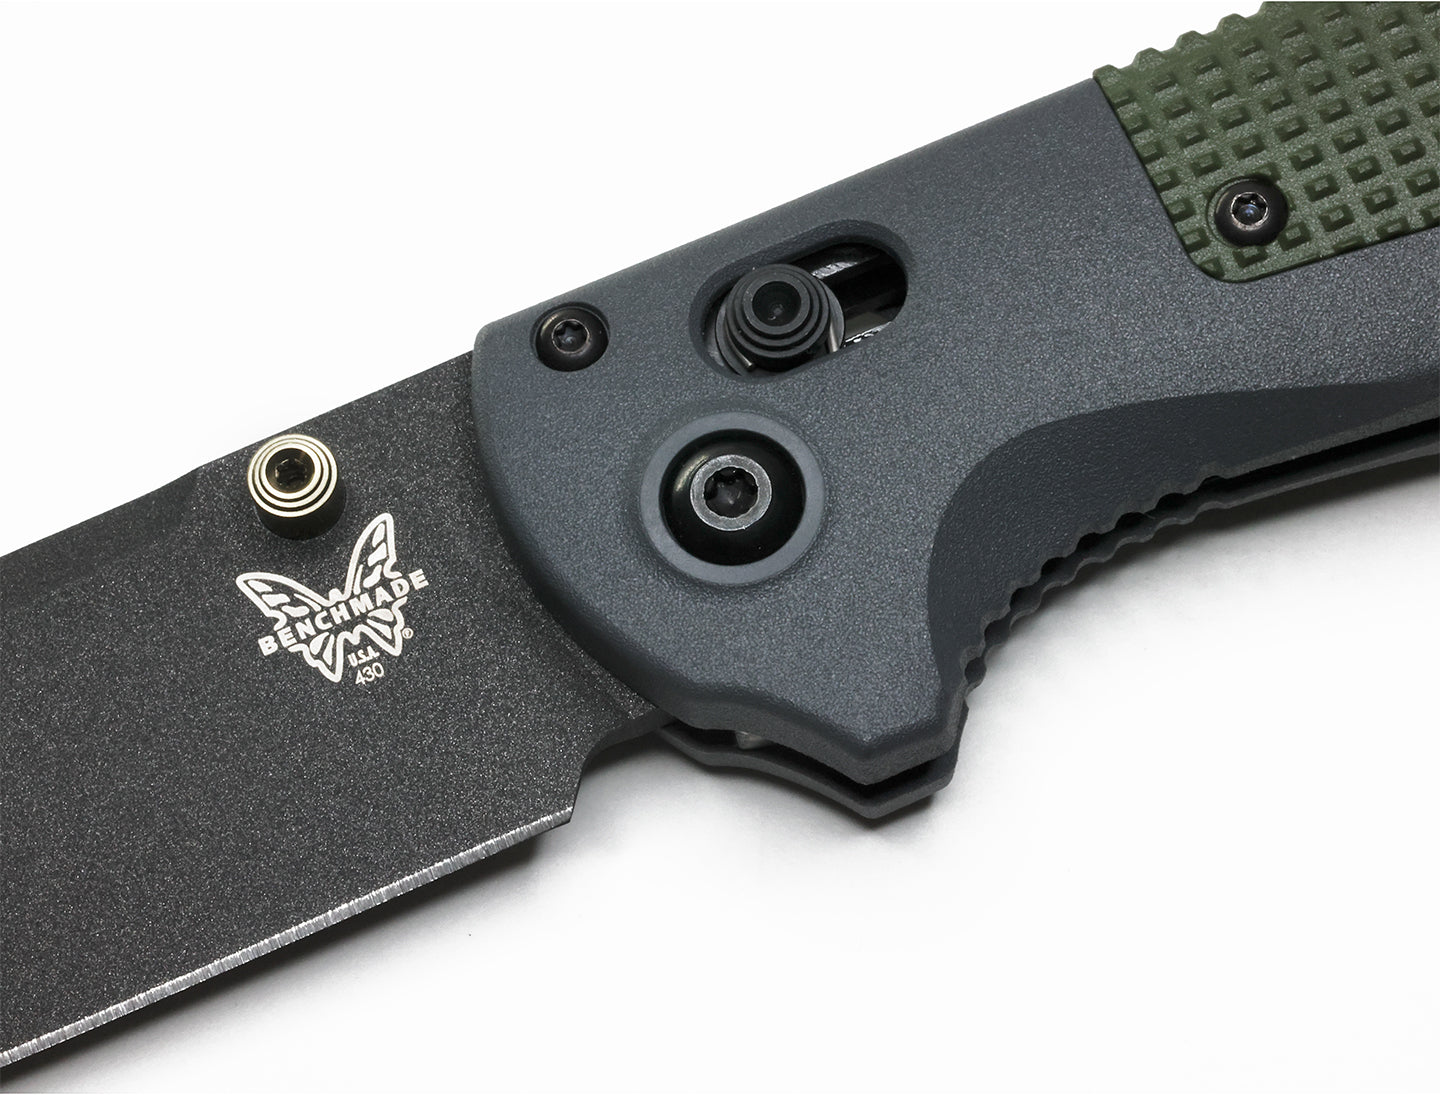 Benchmade 430BK Redoubt Axis Folding Knife - Wander Outdoors